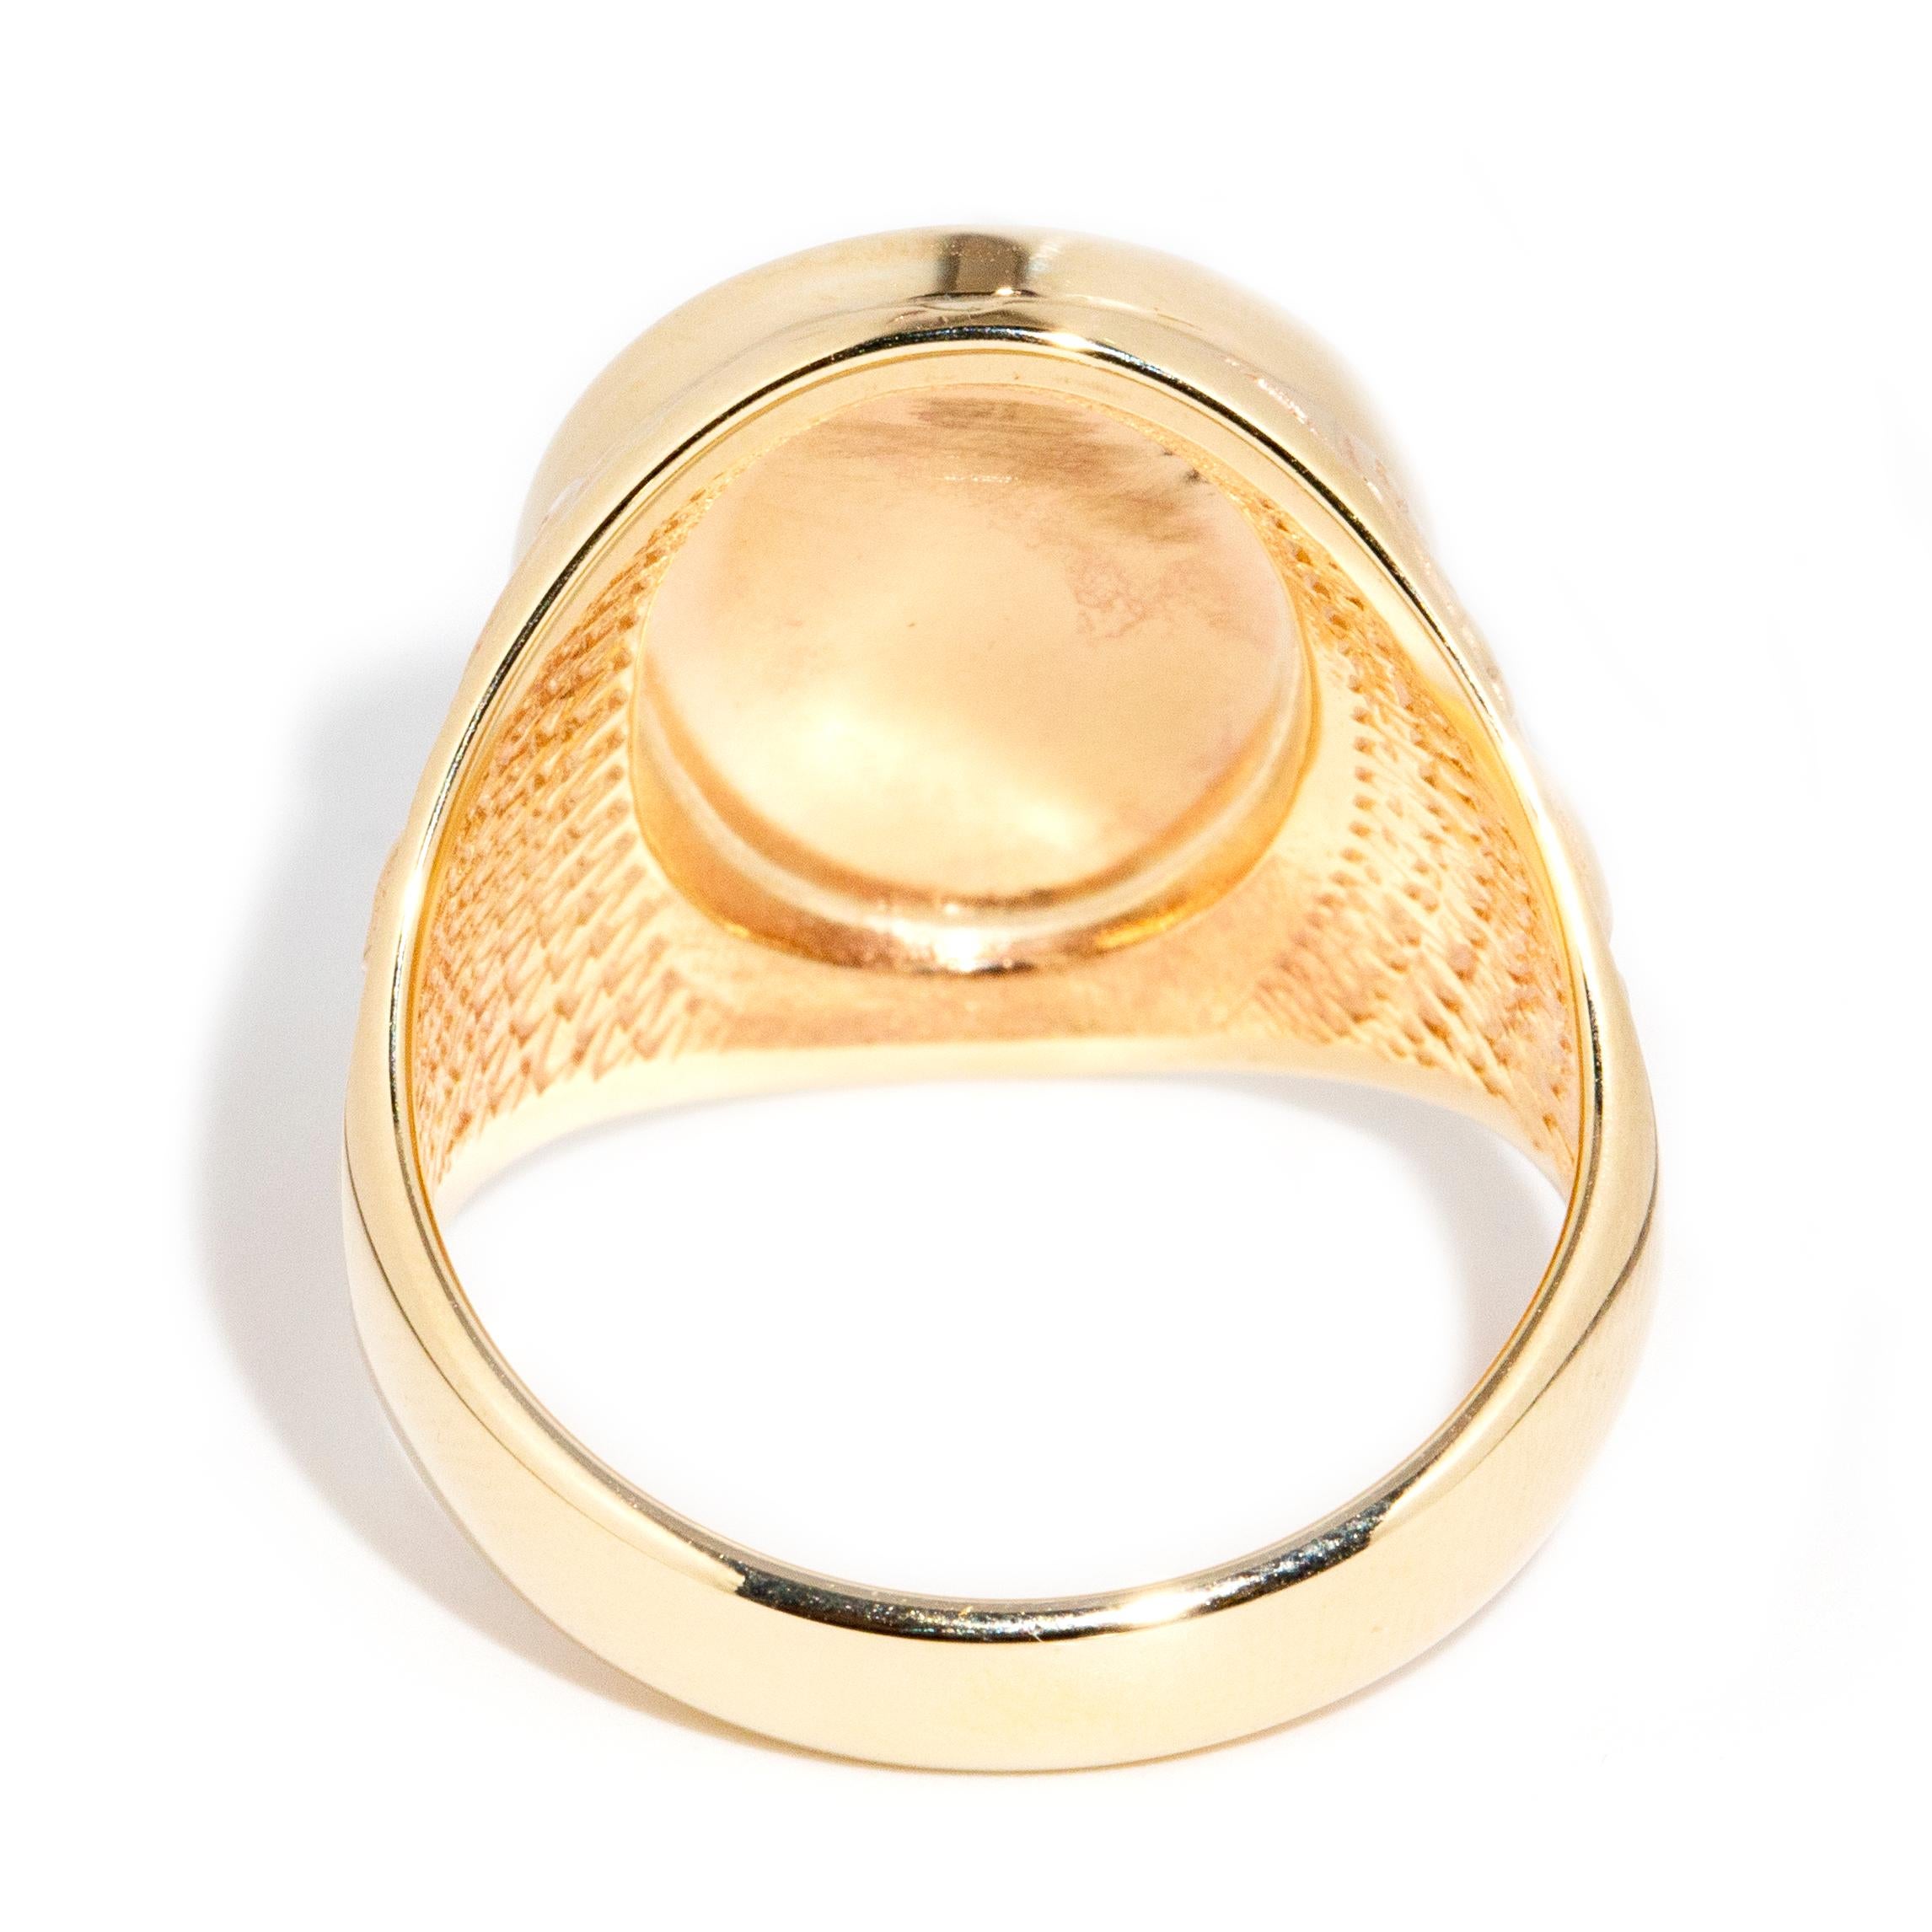 Vintage circa 1970s 9 Carat Yellow Gold Domed Oval Patterned Unisex Signet Ring For Sale 6